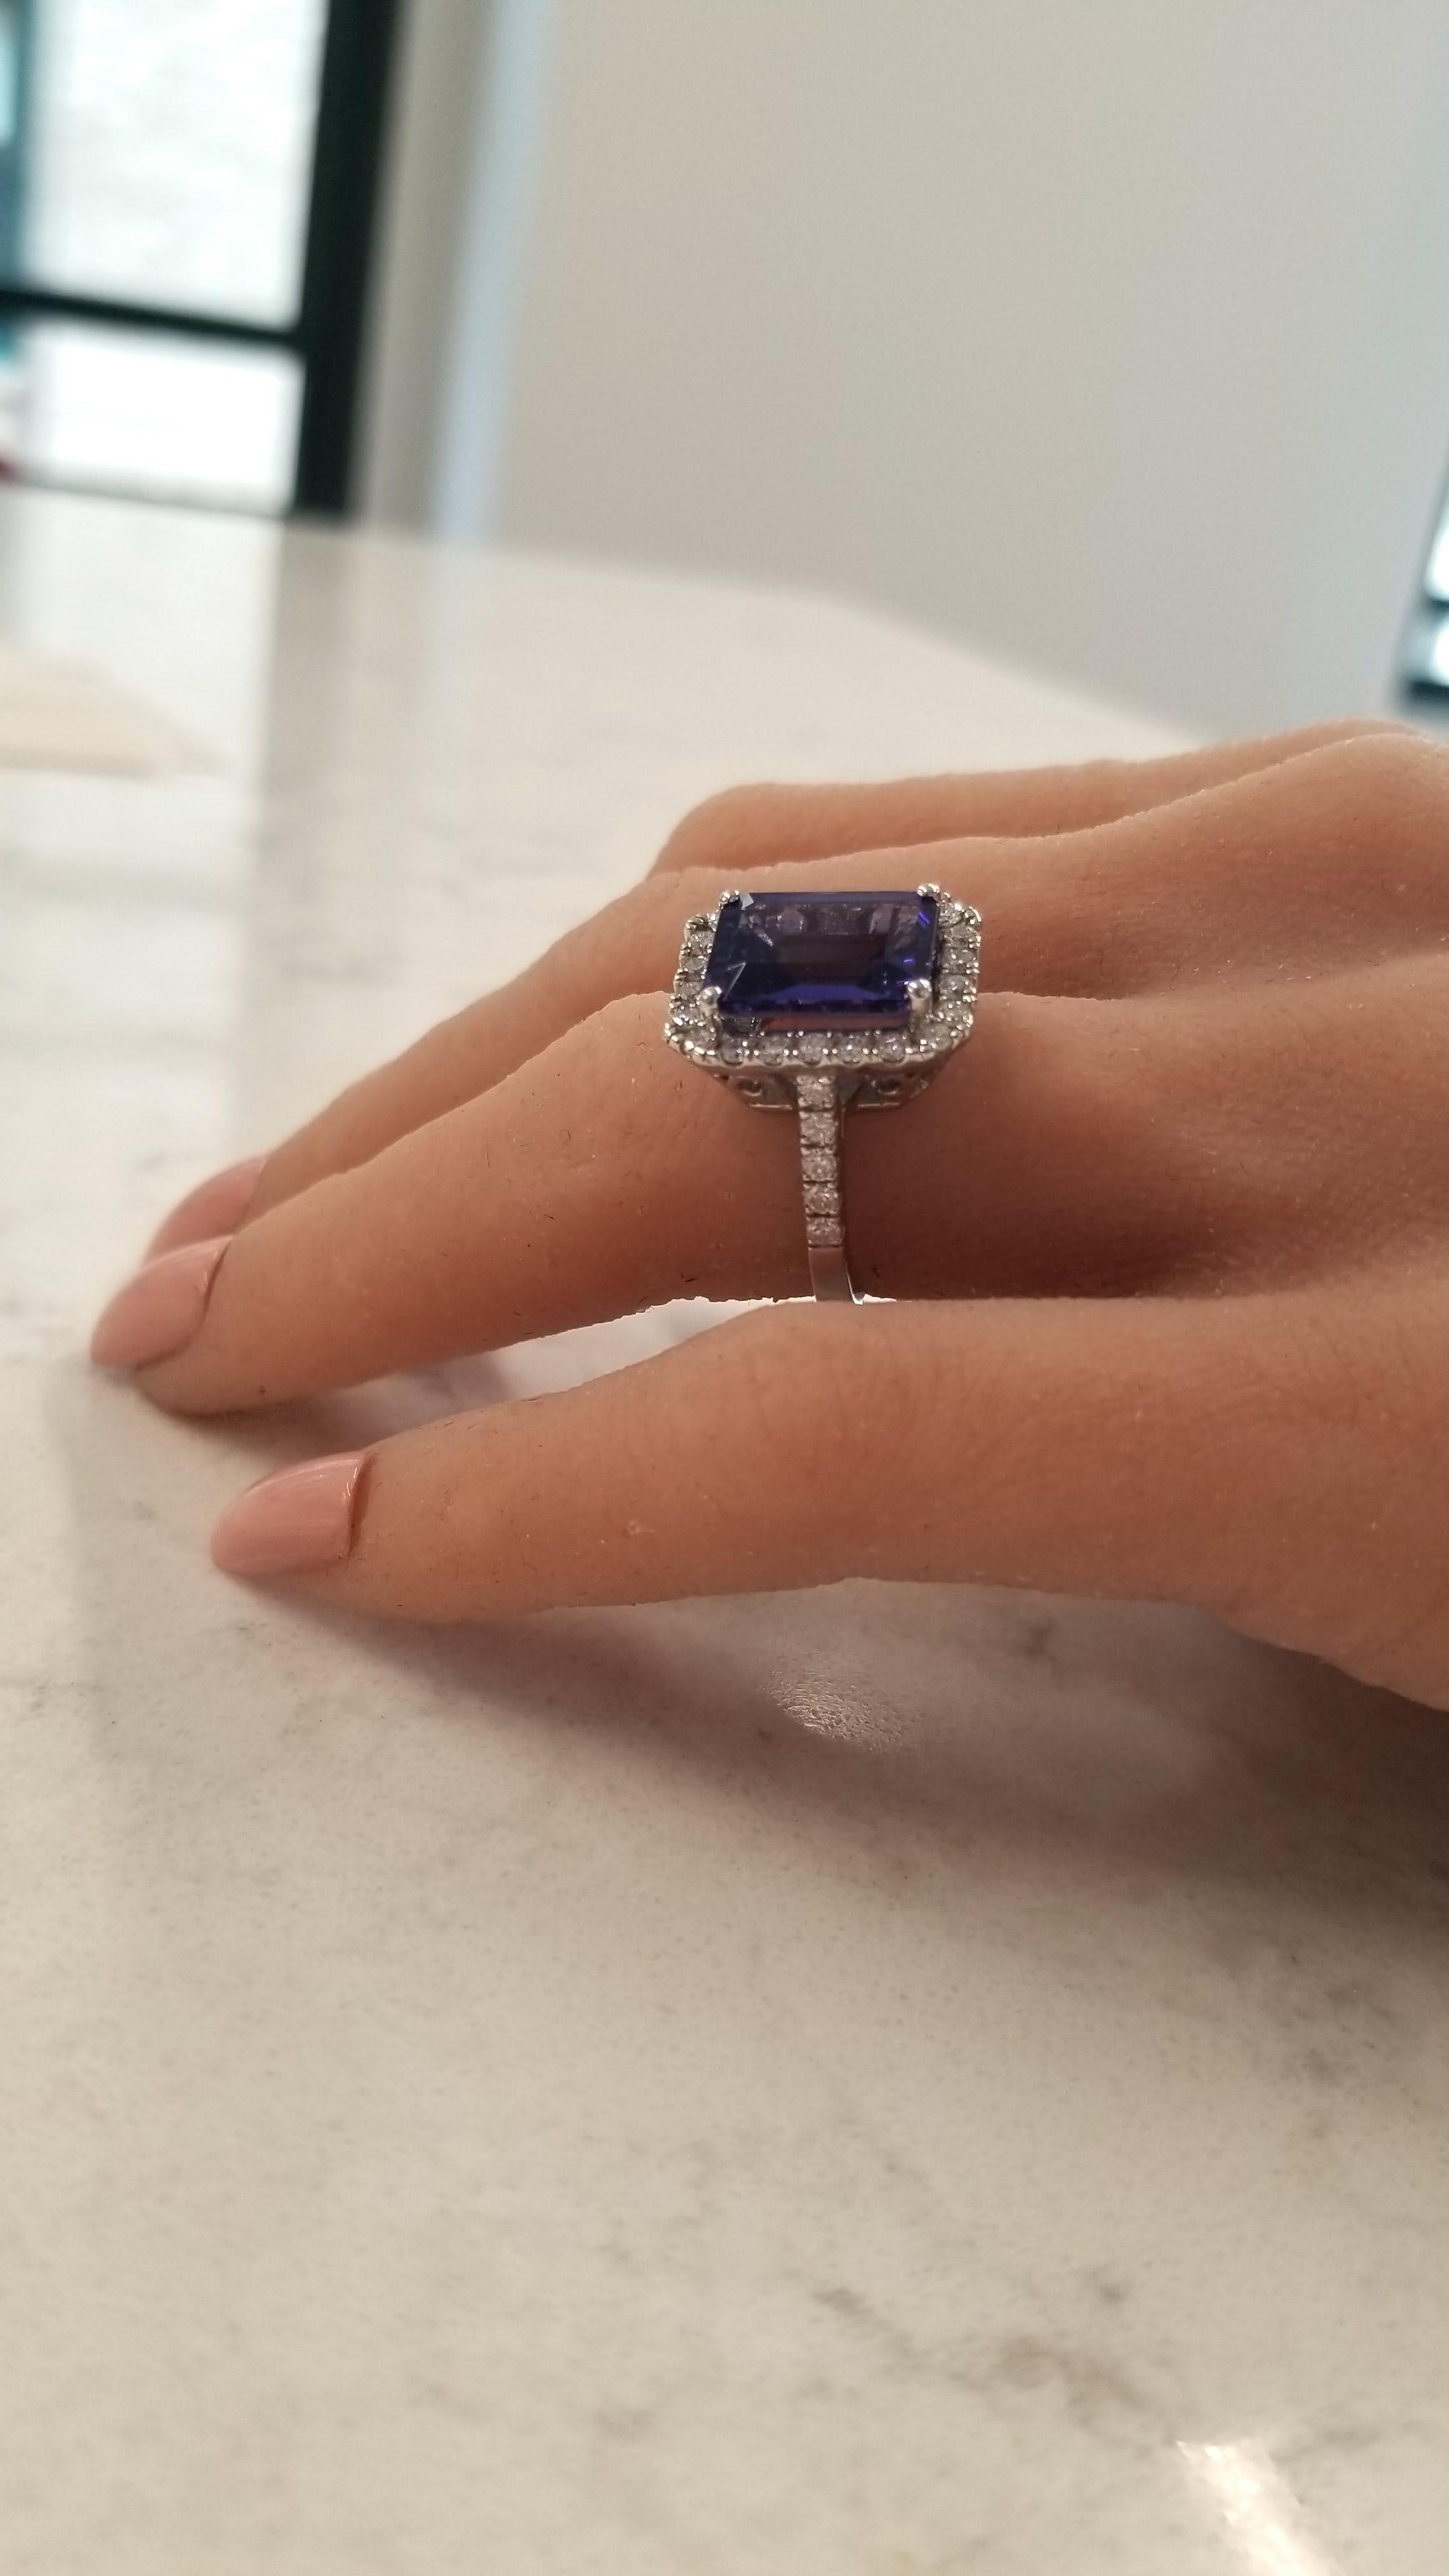 This is an emerald cut tanzanite with a weight of 6.12 carats with measurements of 12.82x9.50mm. The gem source is near the foothills of Mt. Kilimanjaro in Tanzania. Its color is a deep bluish-purple; its transparency, luster, and cutting are